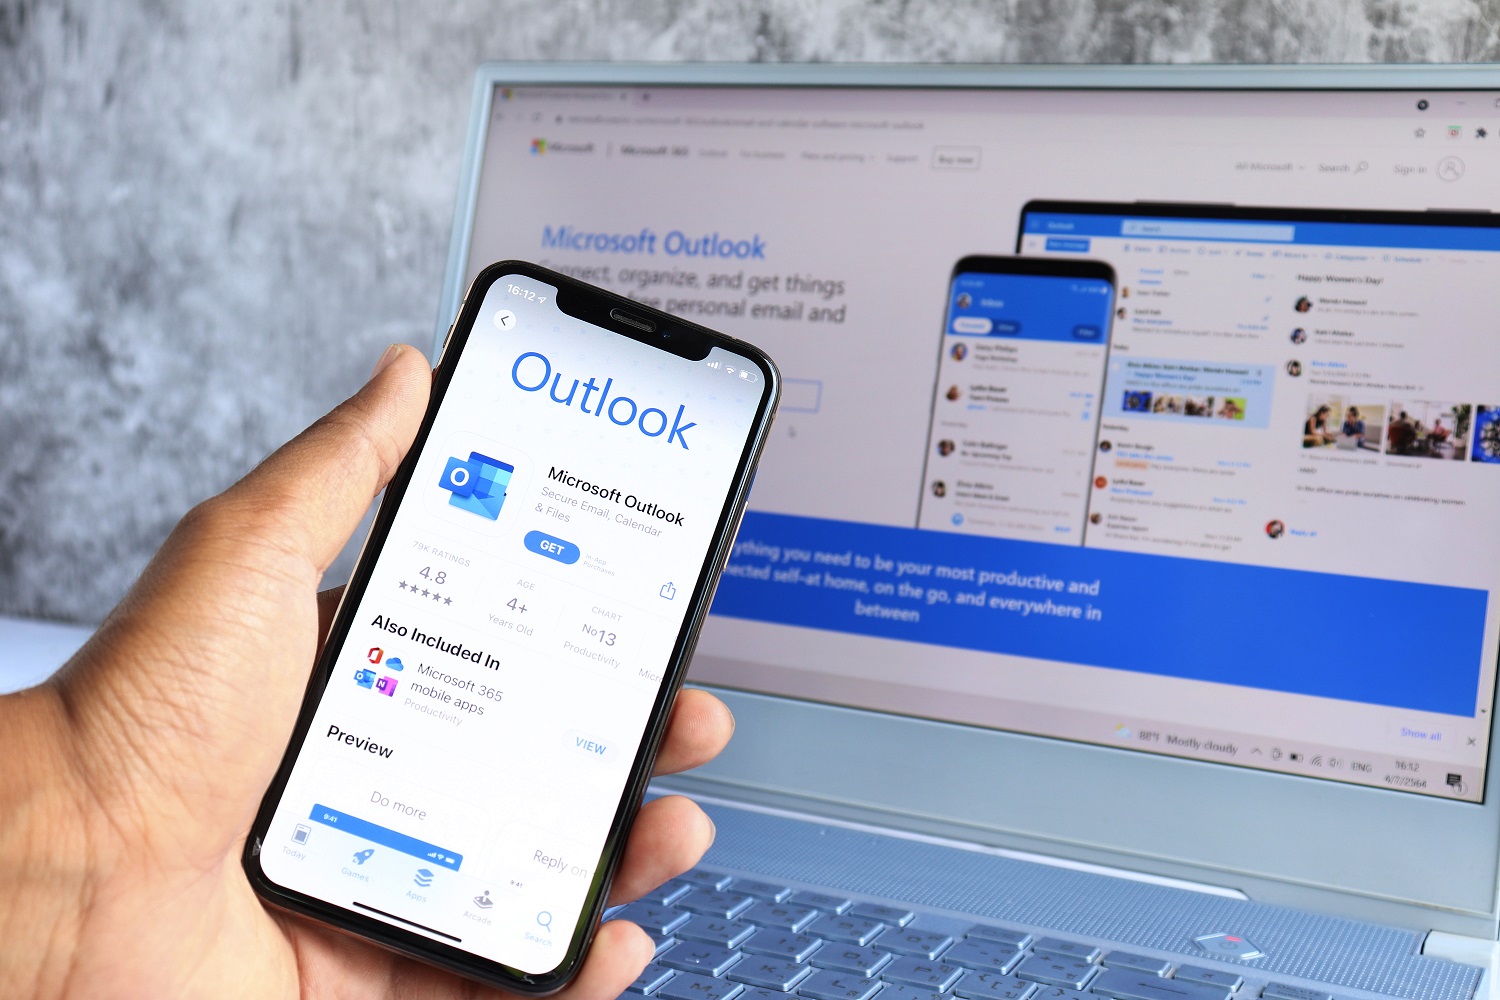 Microsoft Outlook on computer screen and Microsoft Outlook logo